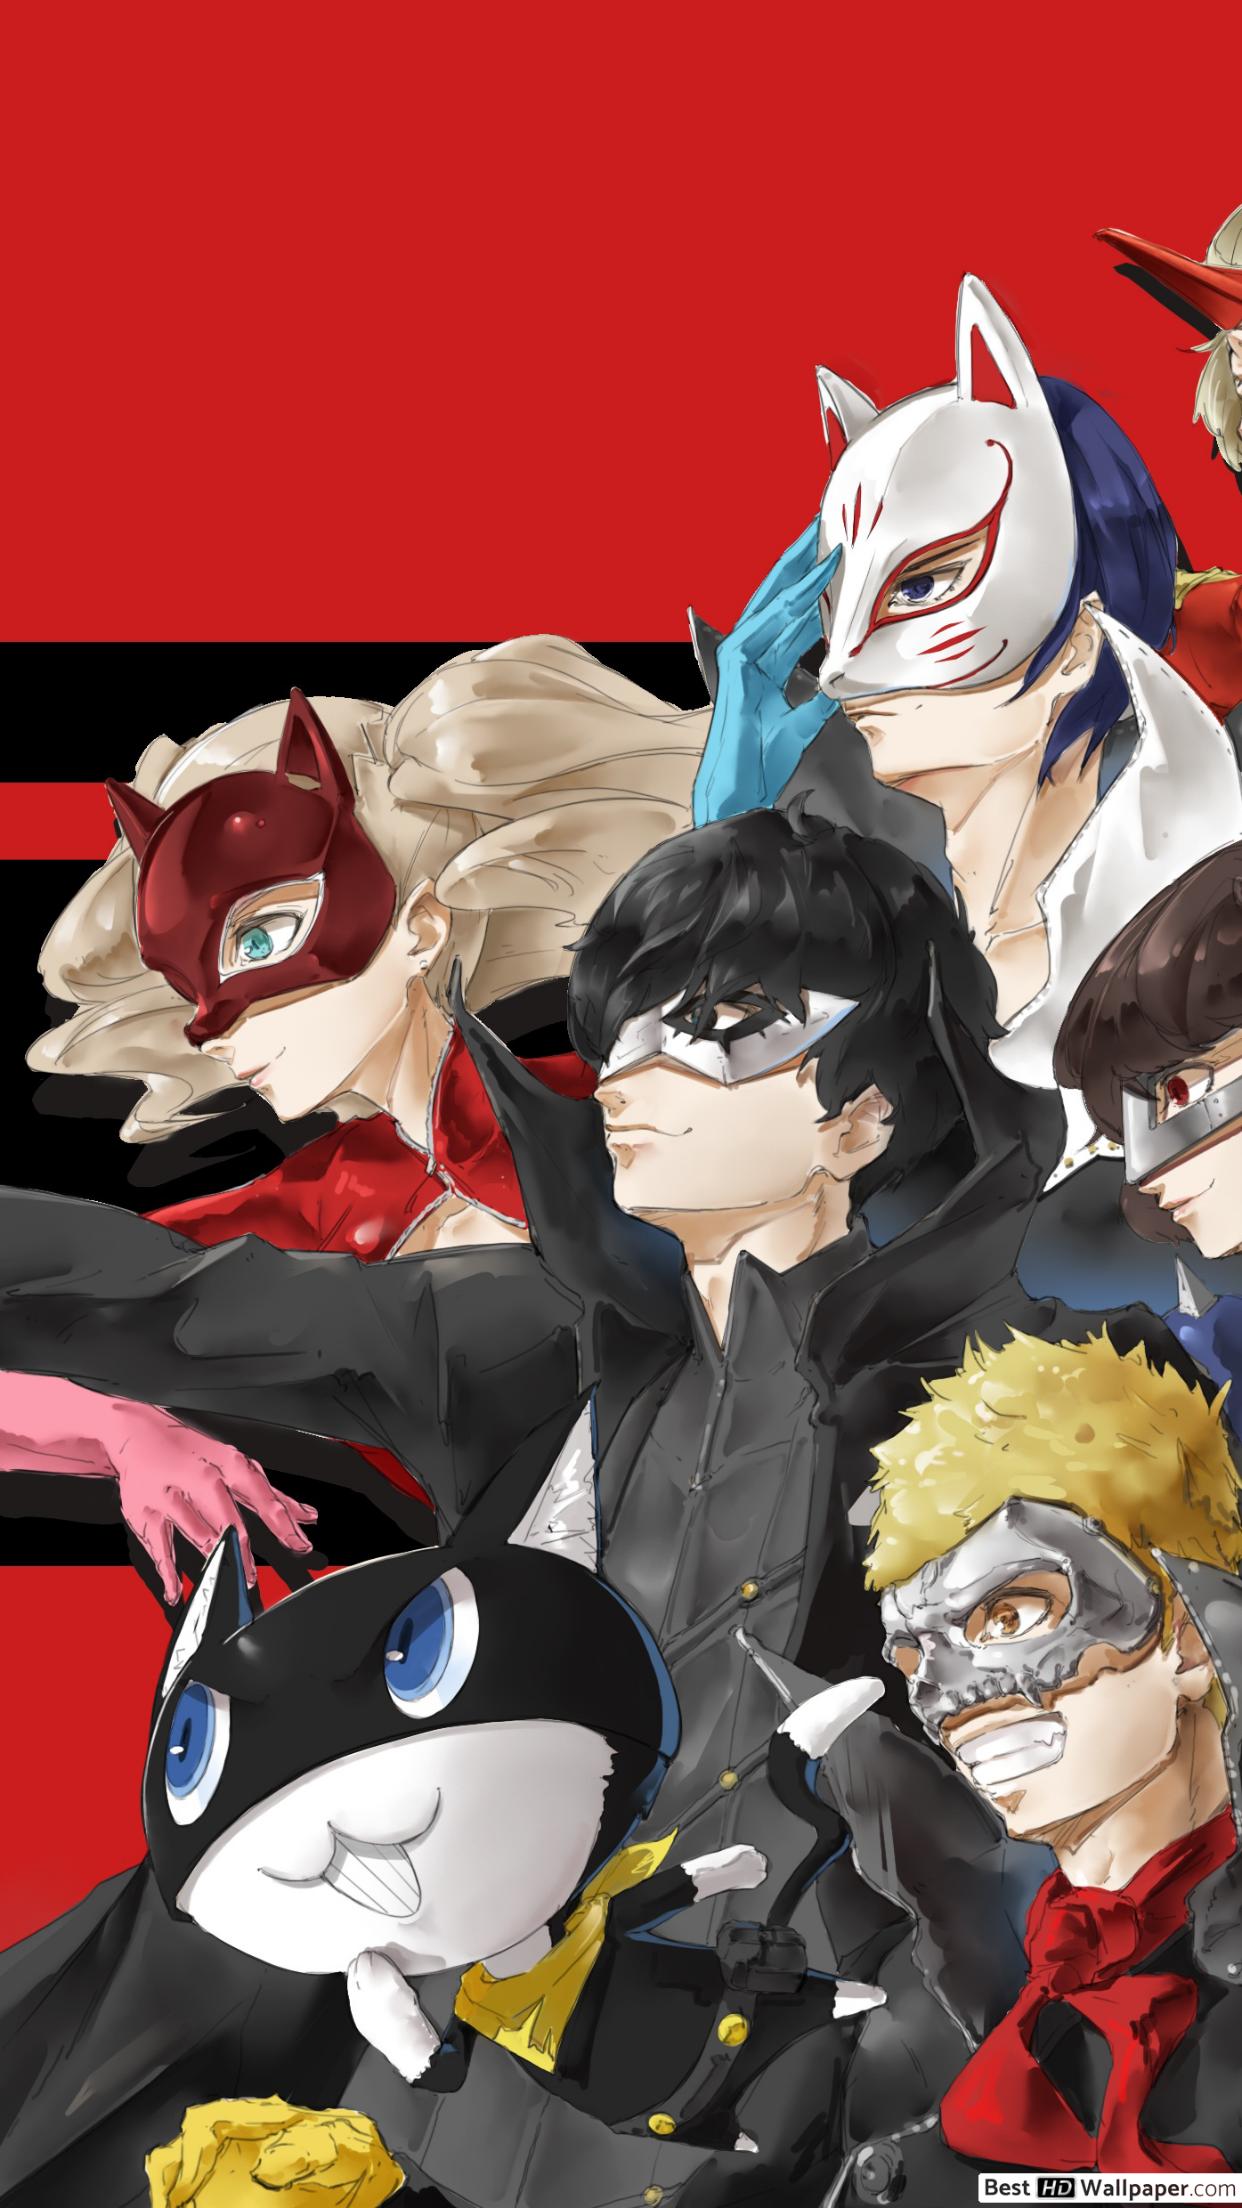 Persona 5 The Animation (All Characters) HD wallpaper download